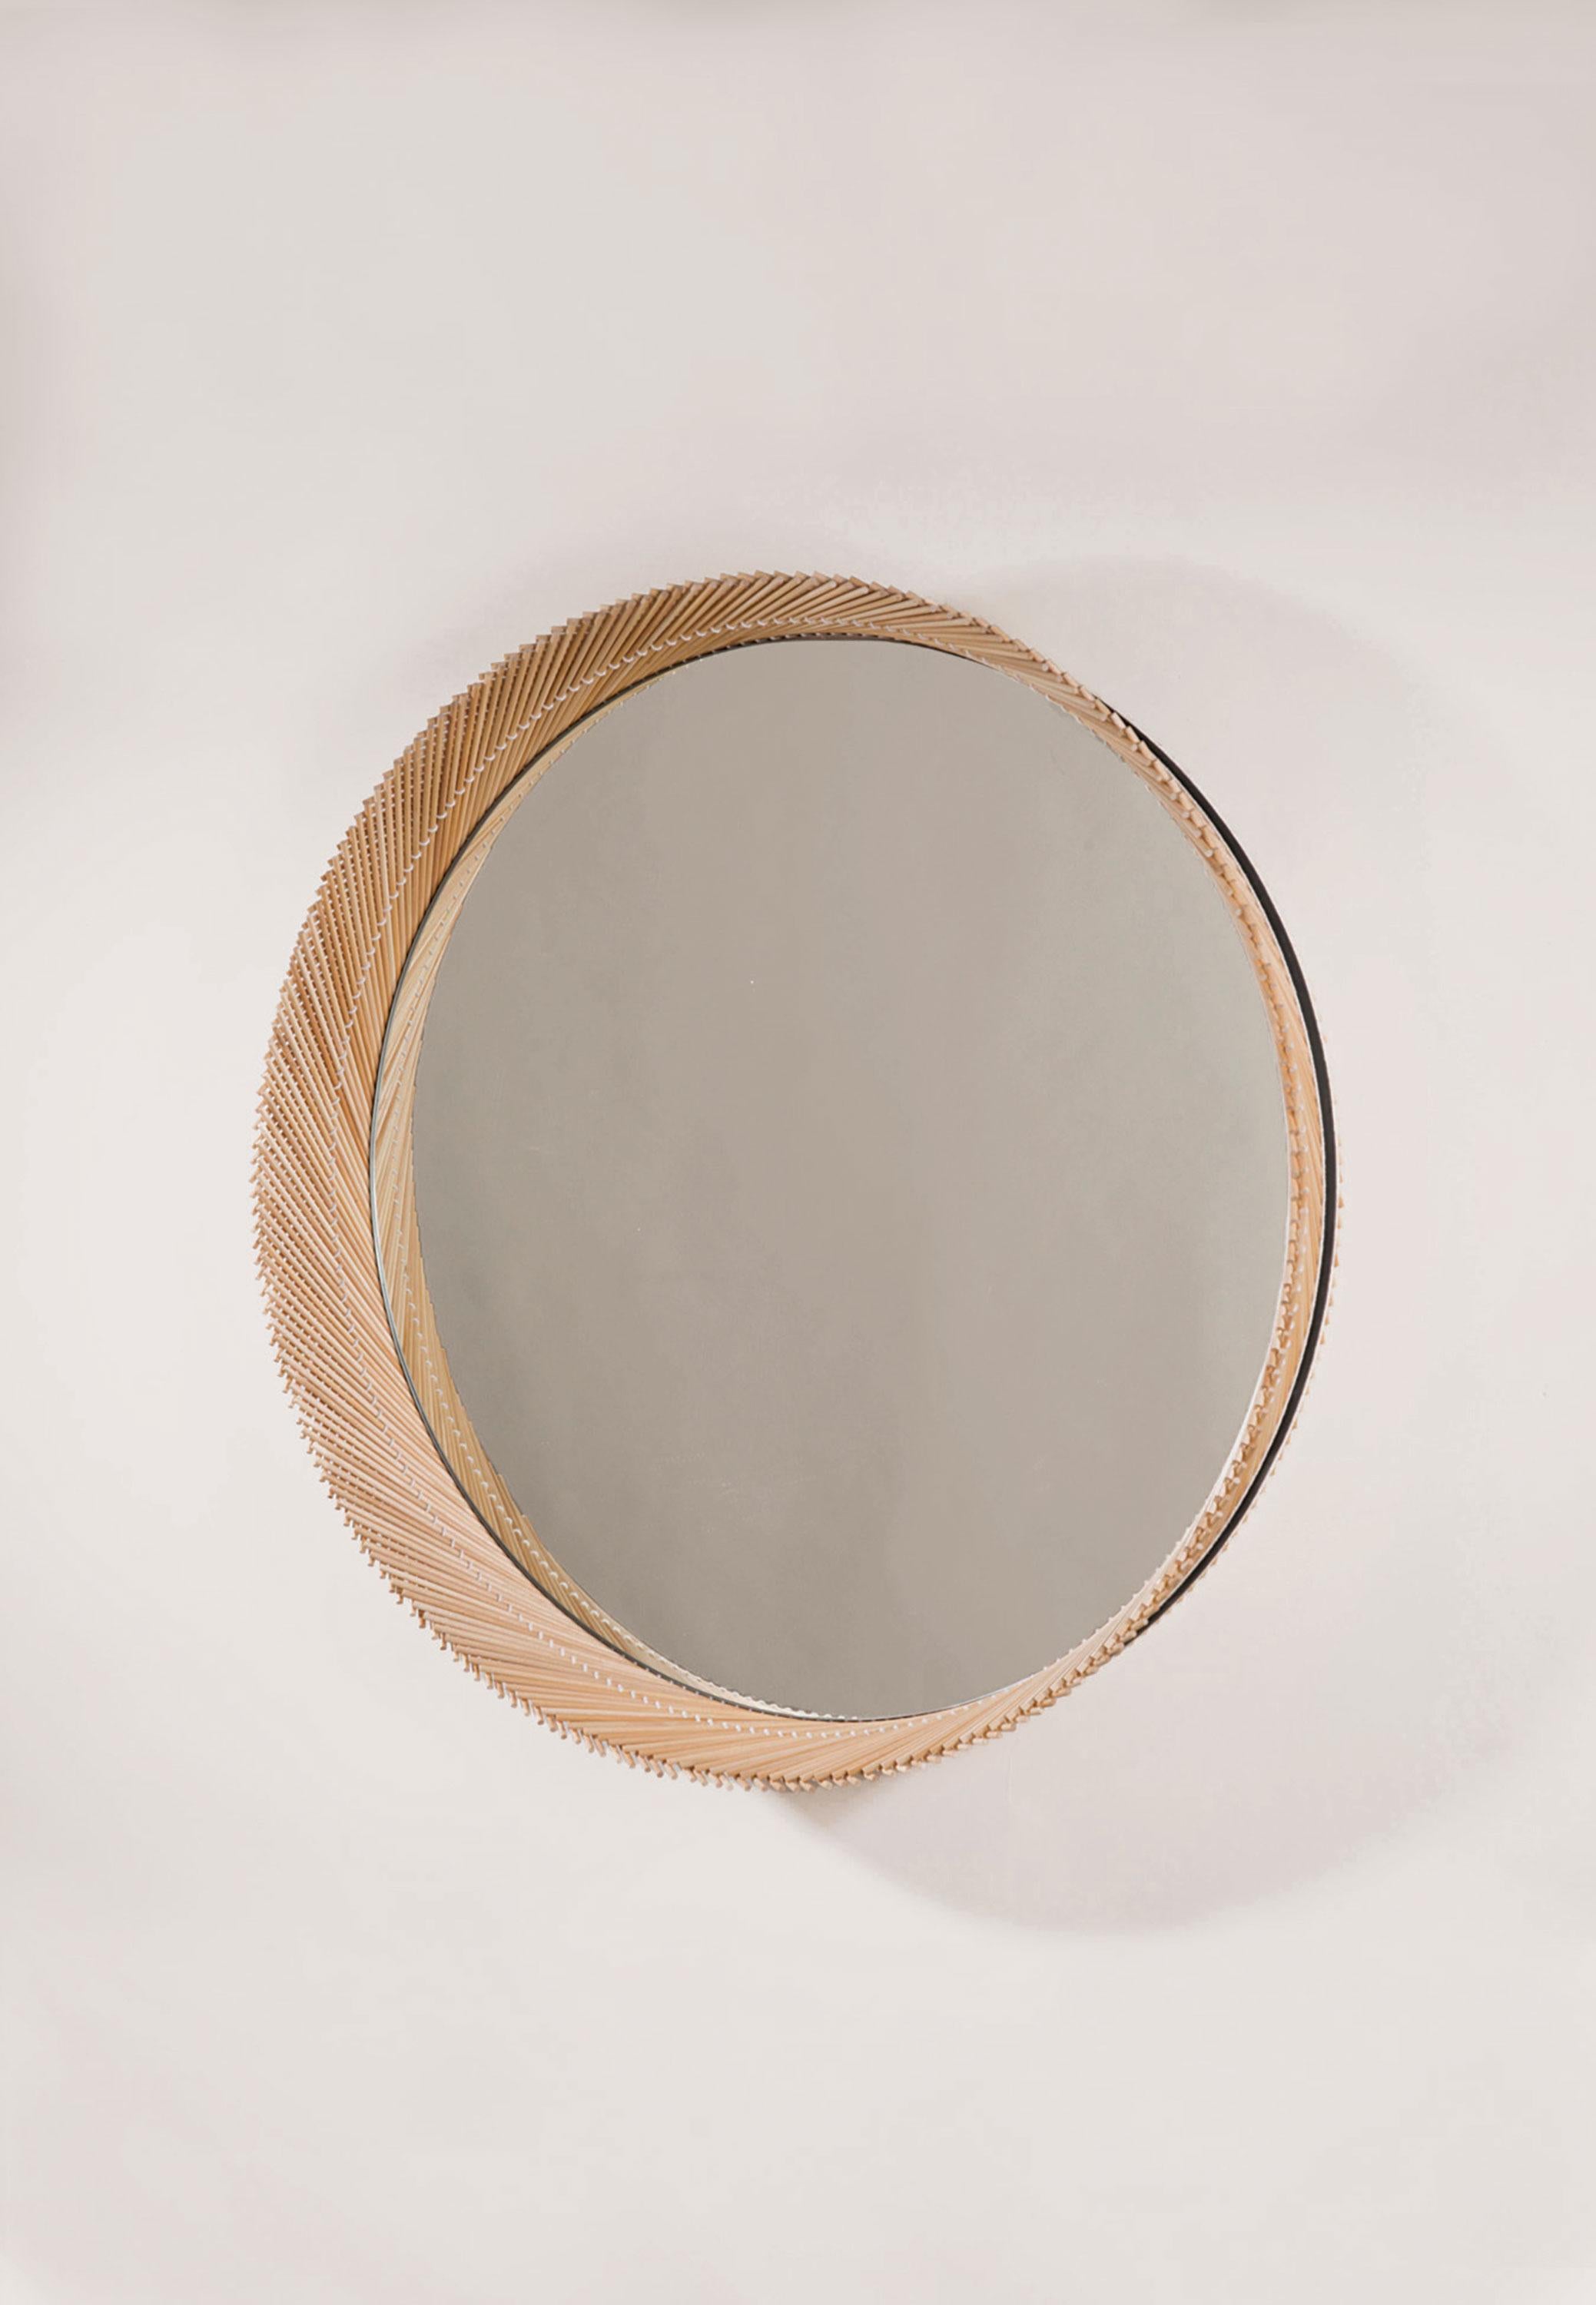 Mooda Maple round mirror 30´ by Indo Made
One of a kind
Dimensions: Ø 88.9 x 10,2 cm
Materials: Maple, Clear Mirror

Also available in other dimensions and materials. Please contact us.
Ø options: 58,4 cm, 73.7 cm, 88.9 cm and 106.7